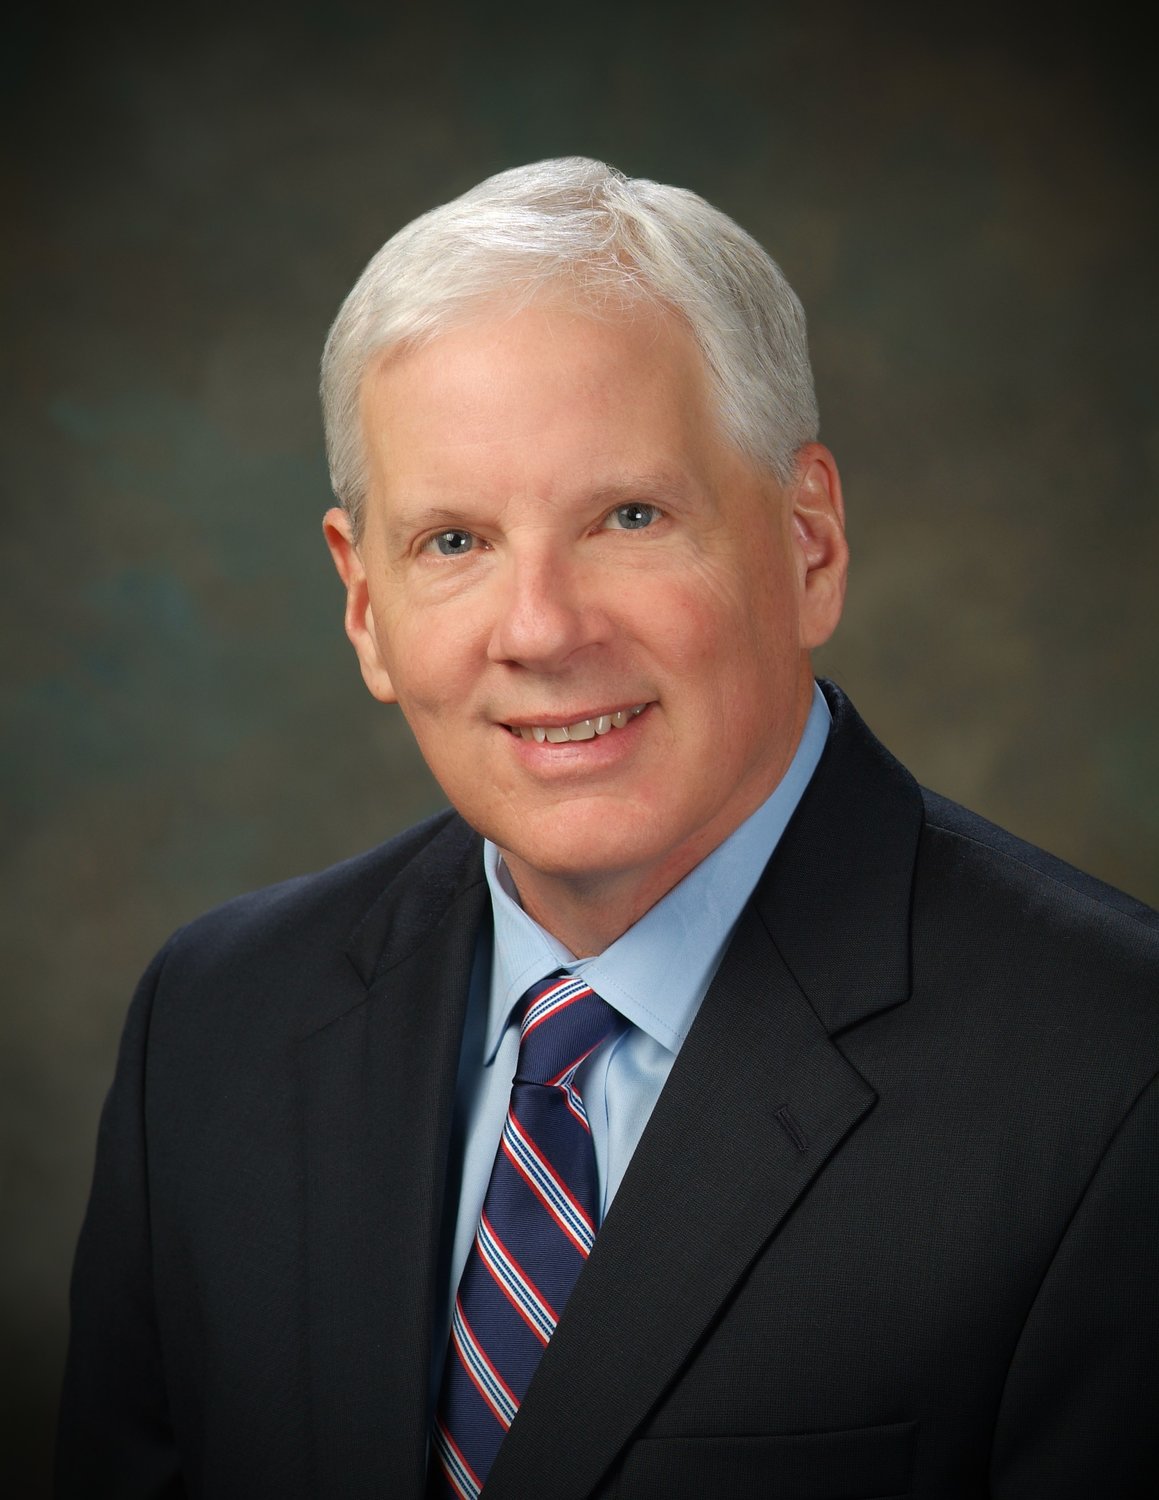 J. Scott Angle is the University of Florida’s Vice President for Agriculture and Natural Resources and leader of the UF Institute of Food and Agricultural Sciences (UF/IFAS).